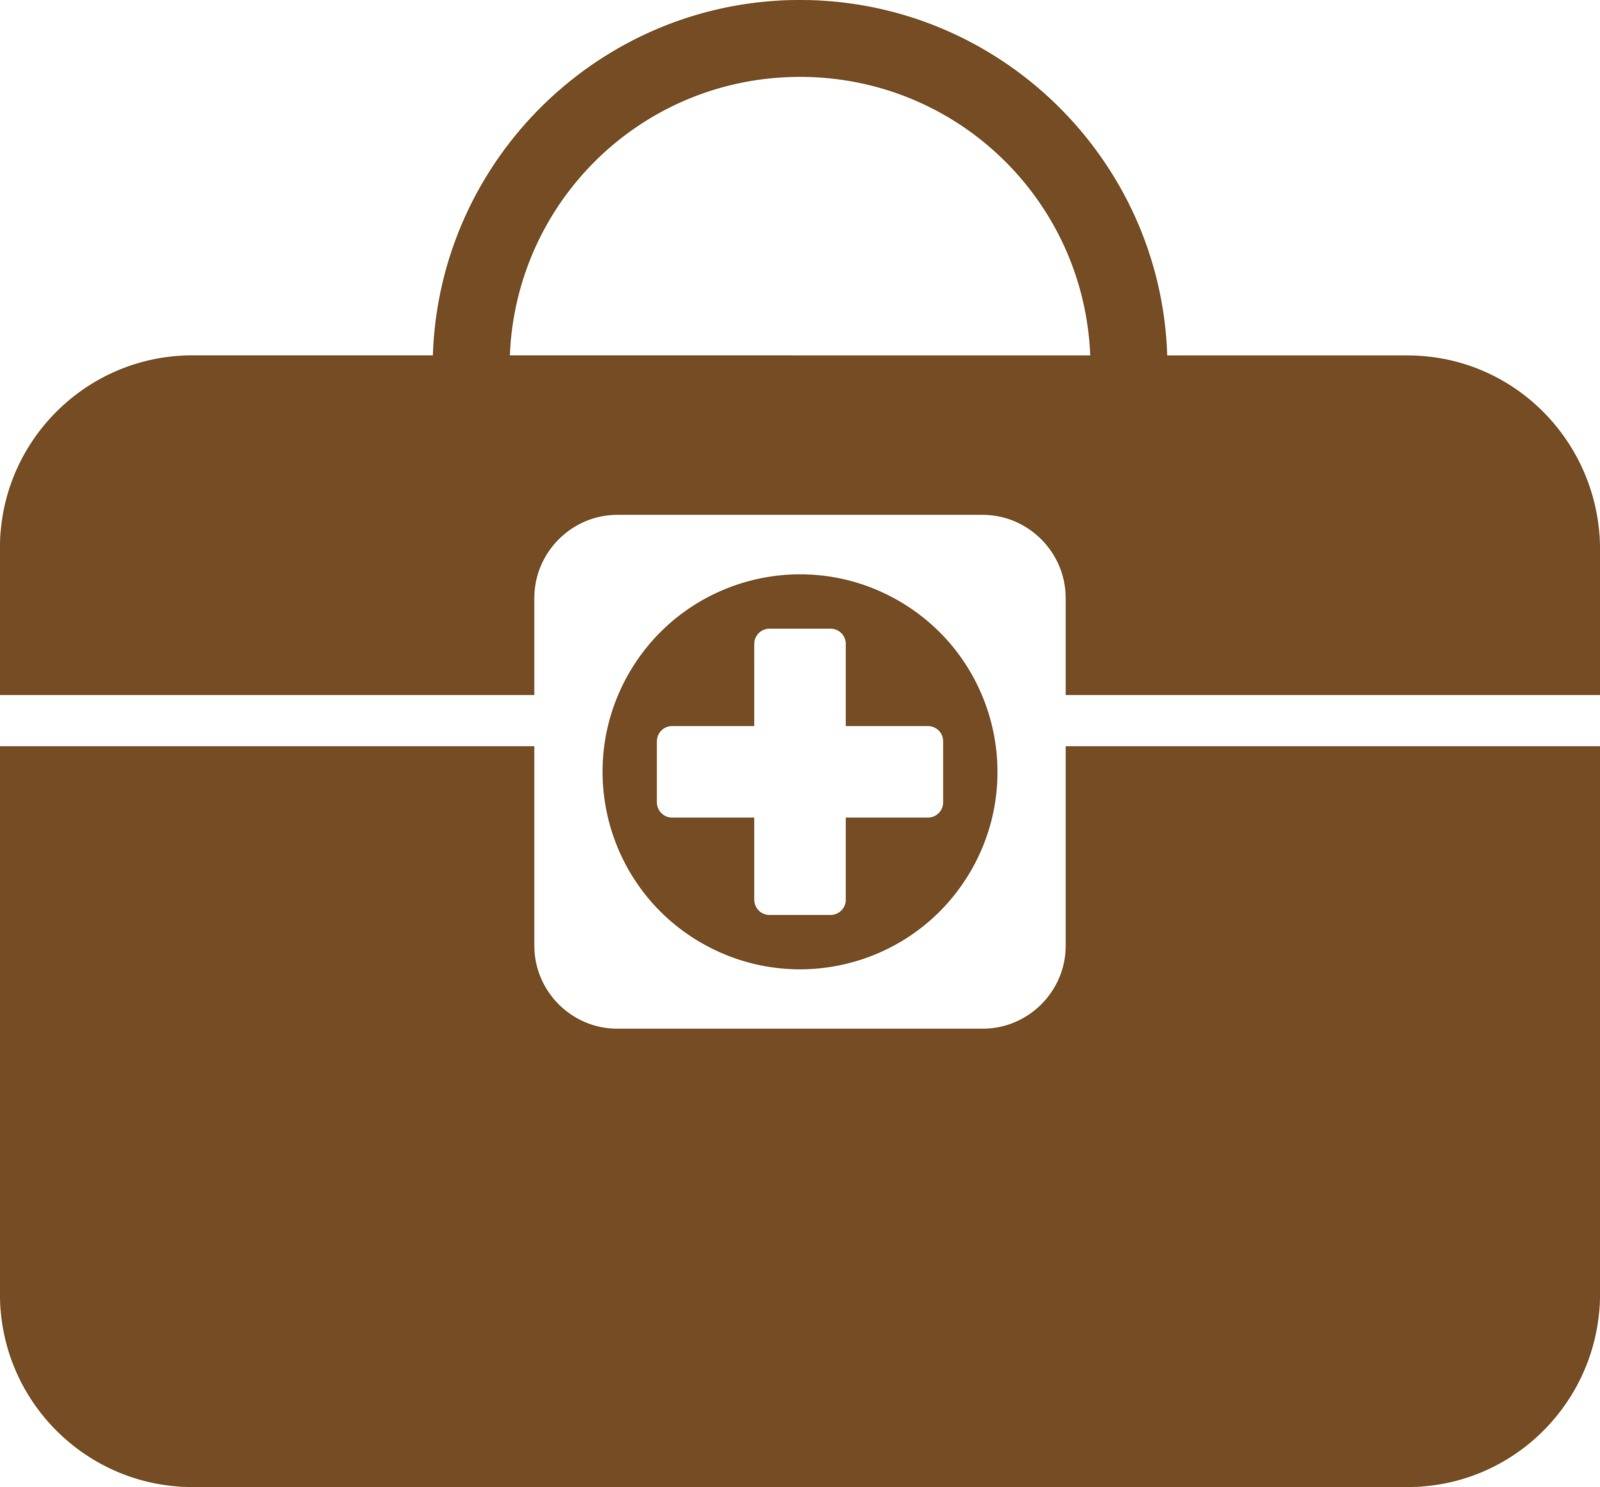 Medic Case vector icon. Style is flat symbol, brown color, rounded angles, white background.